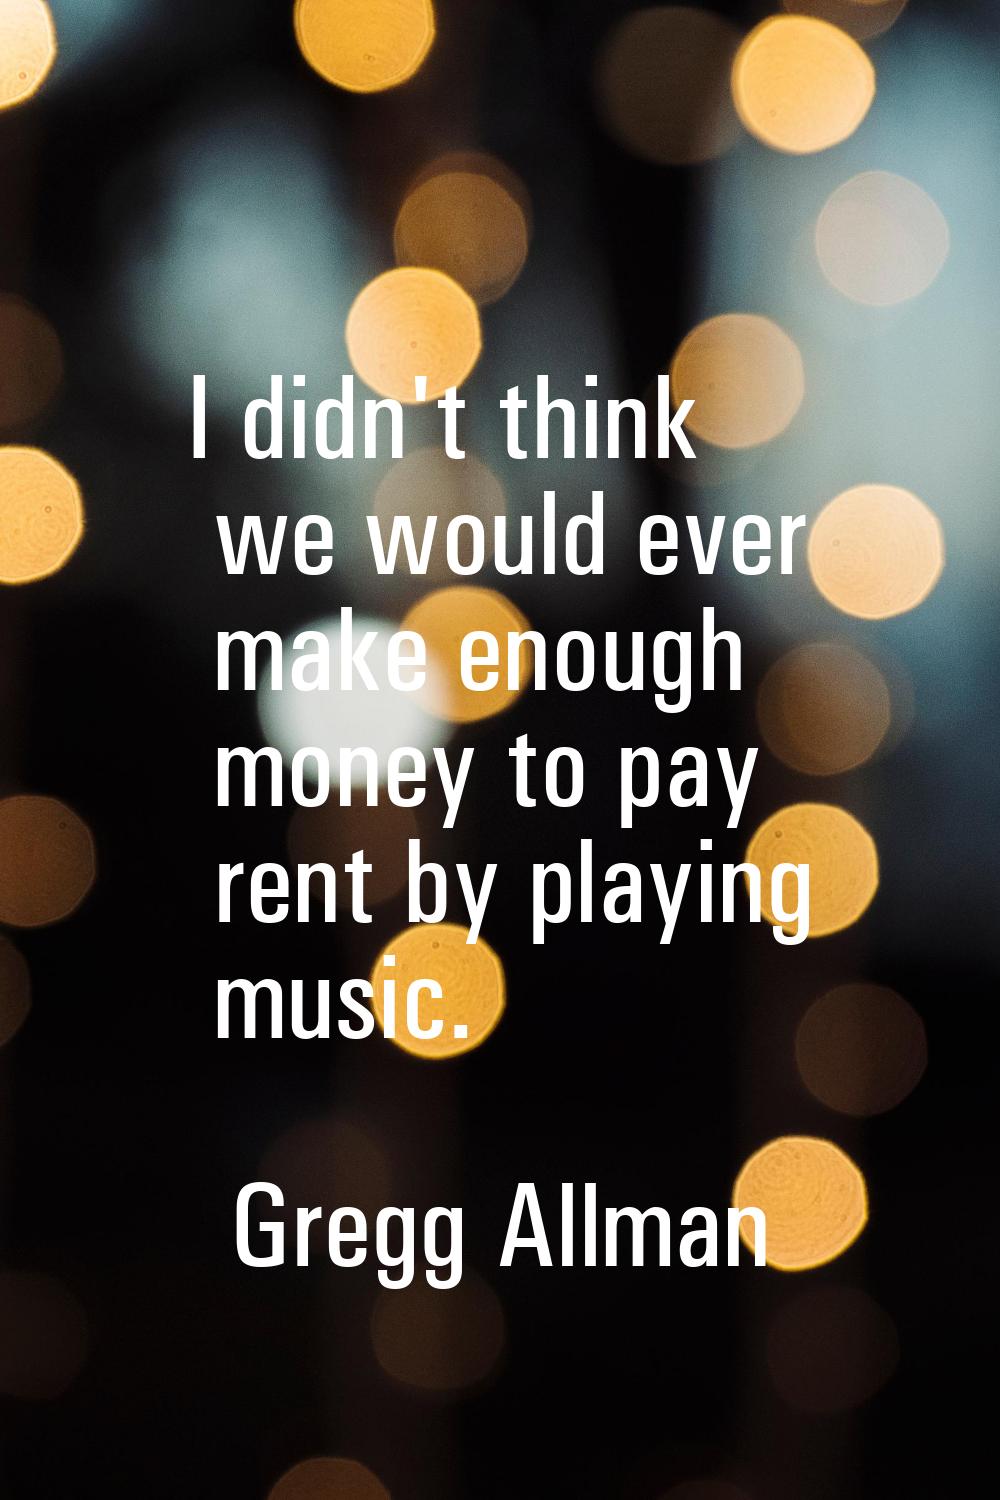 I didn't think we would ever make enough money to pay rent by playing music.